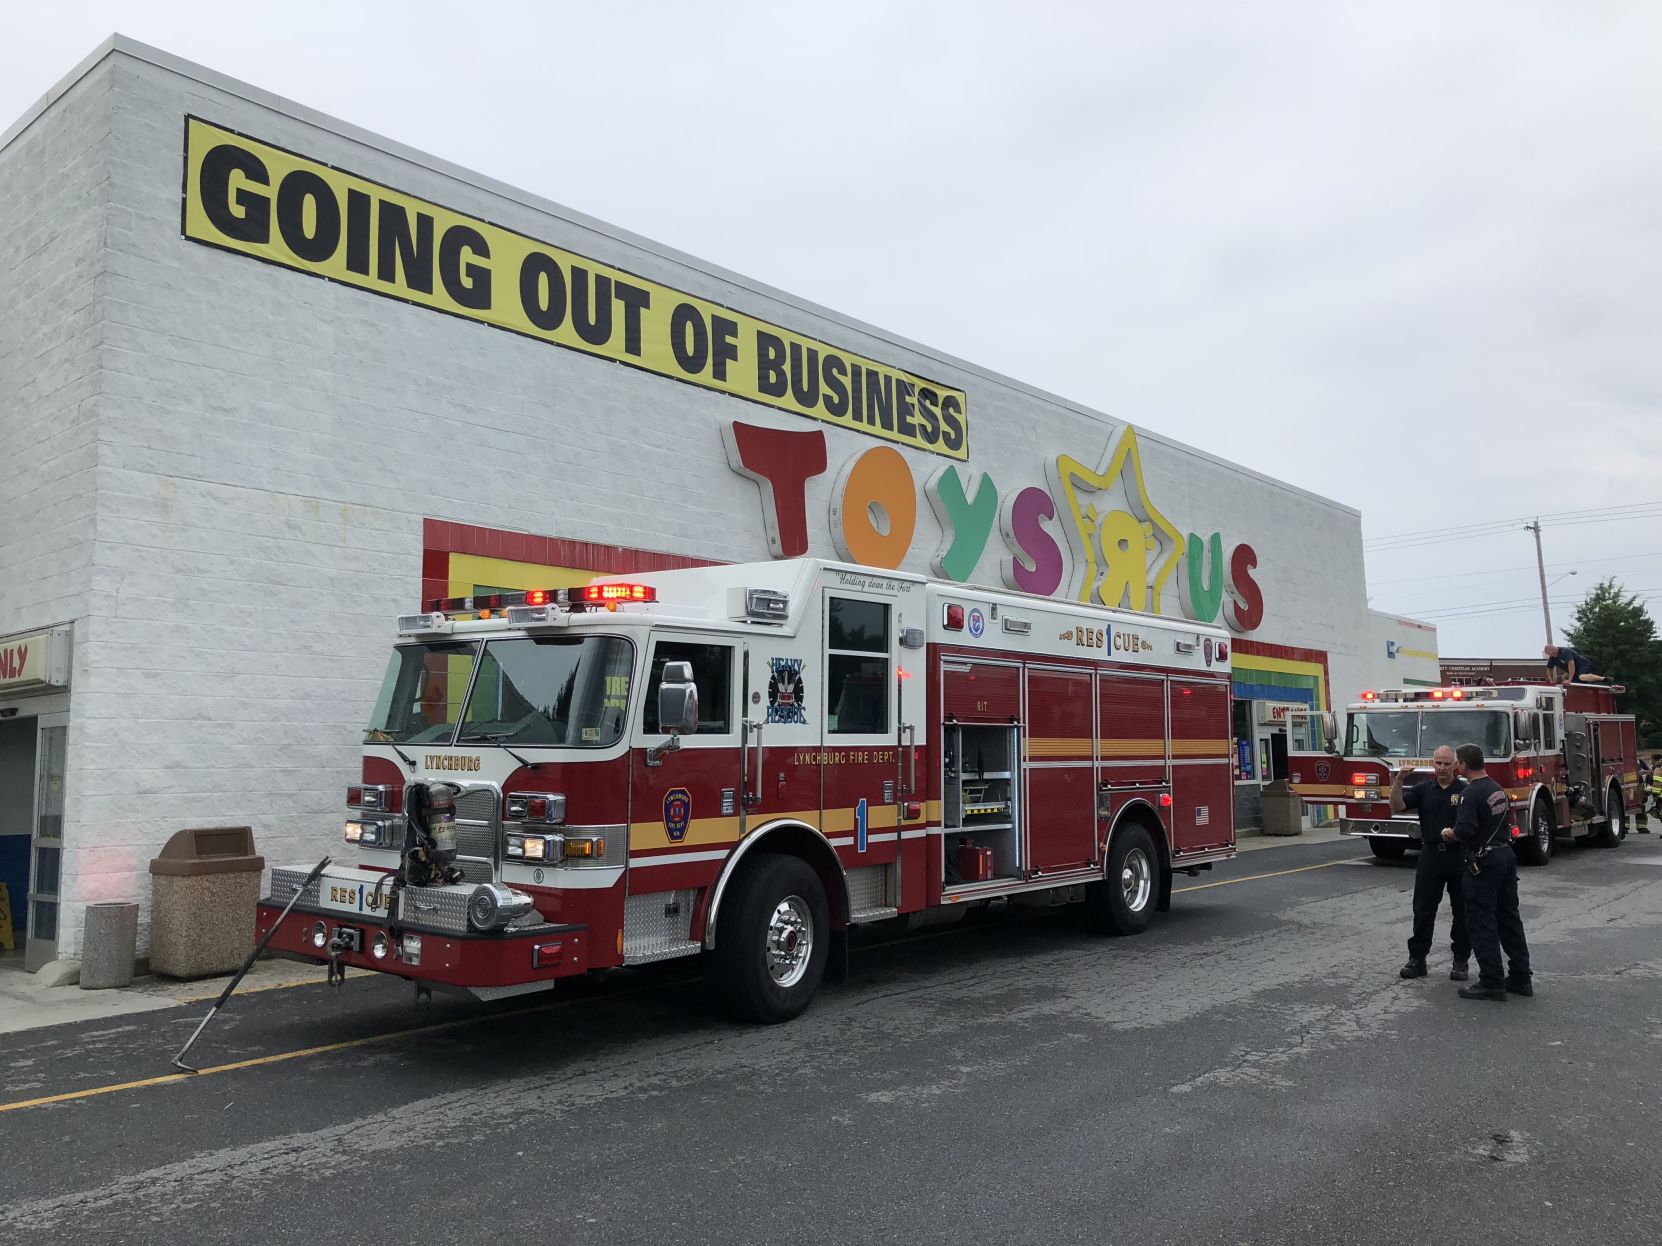 toys r us on fire